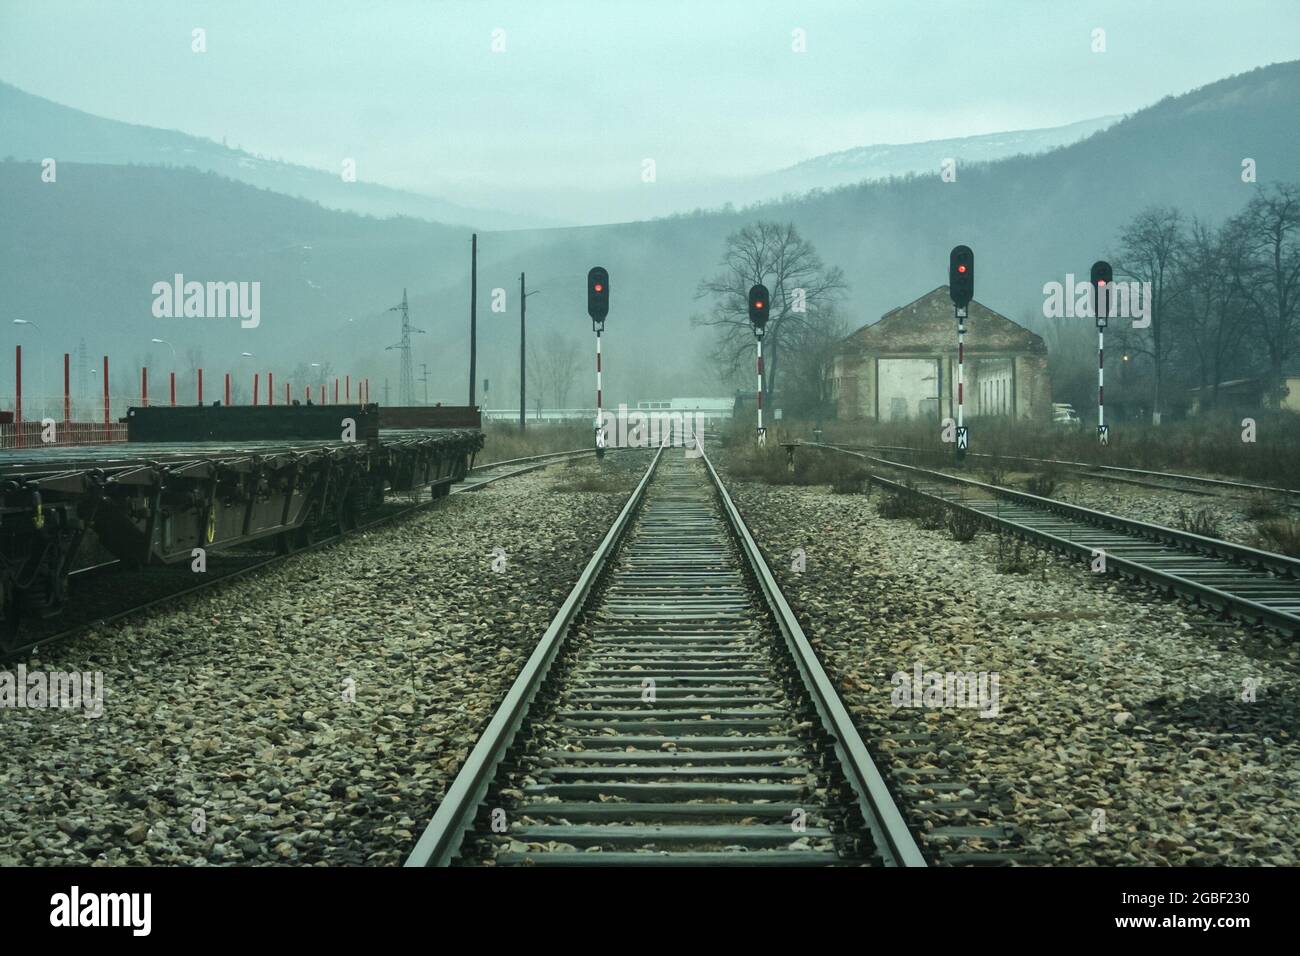 Gloomy atmosphere at the border between south and north kosovo at the train station of Kosovska mitrovica, blocked due to ethnic tensions, a symbol of Stock Photo